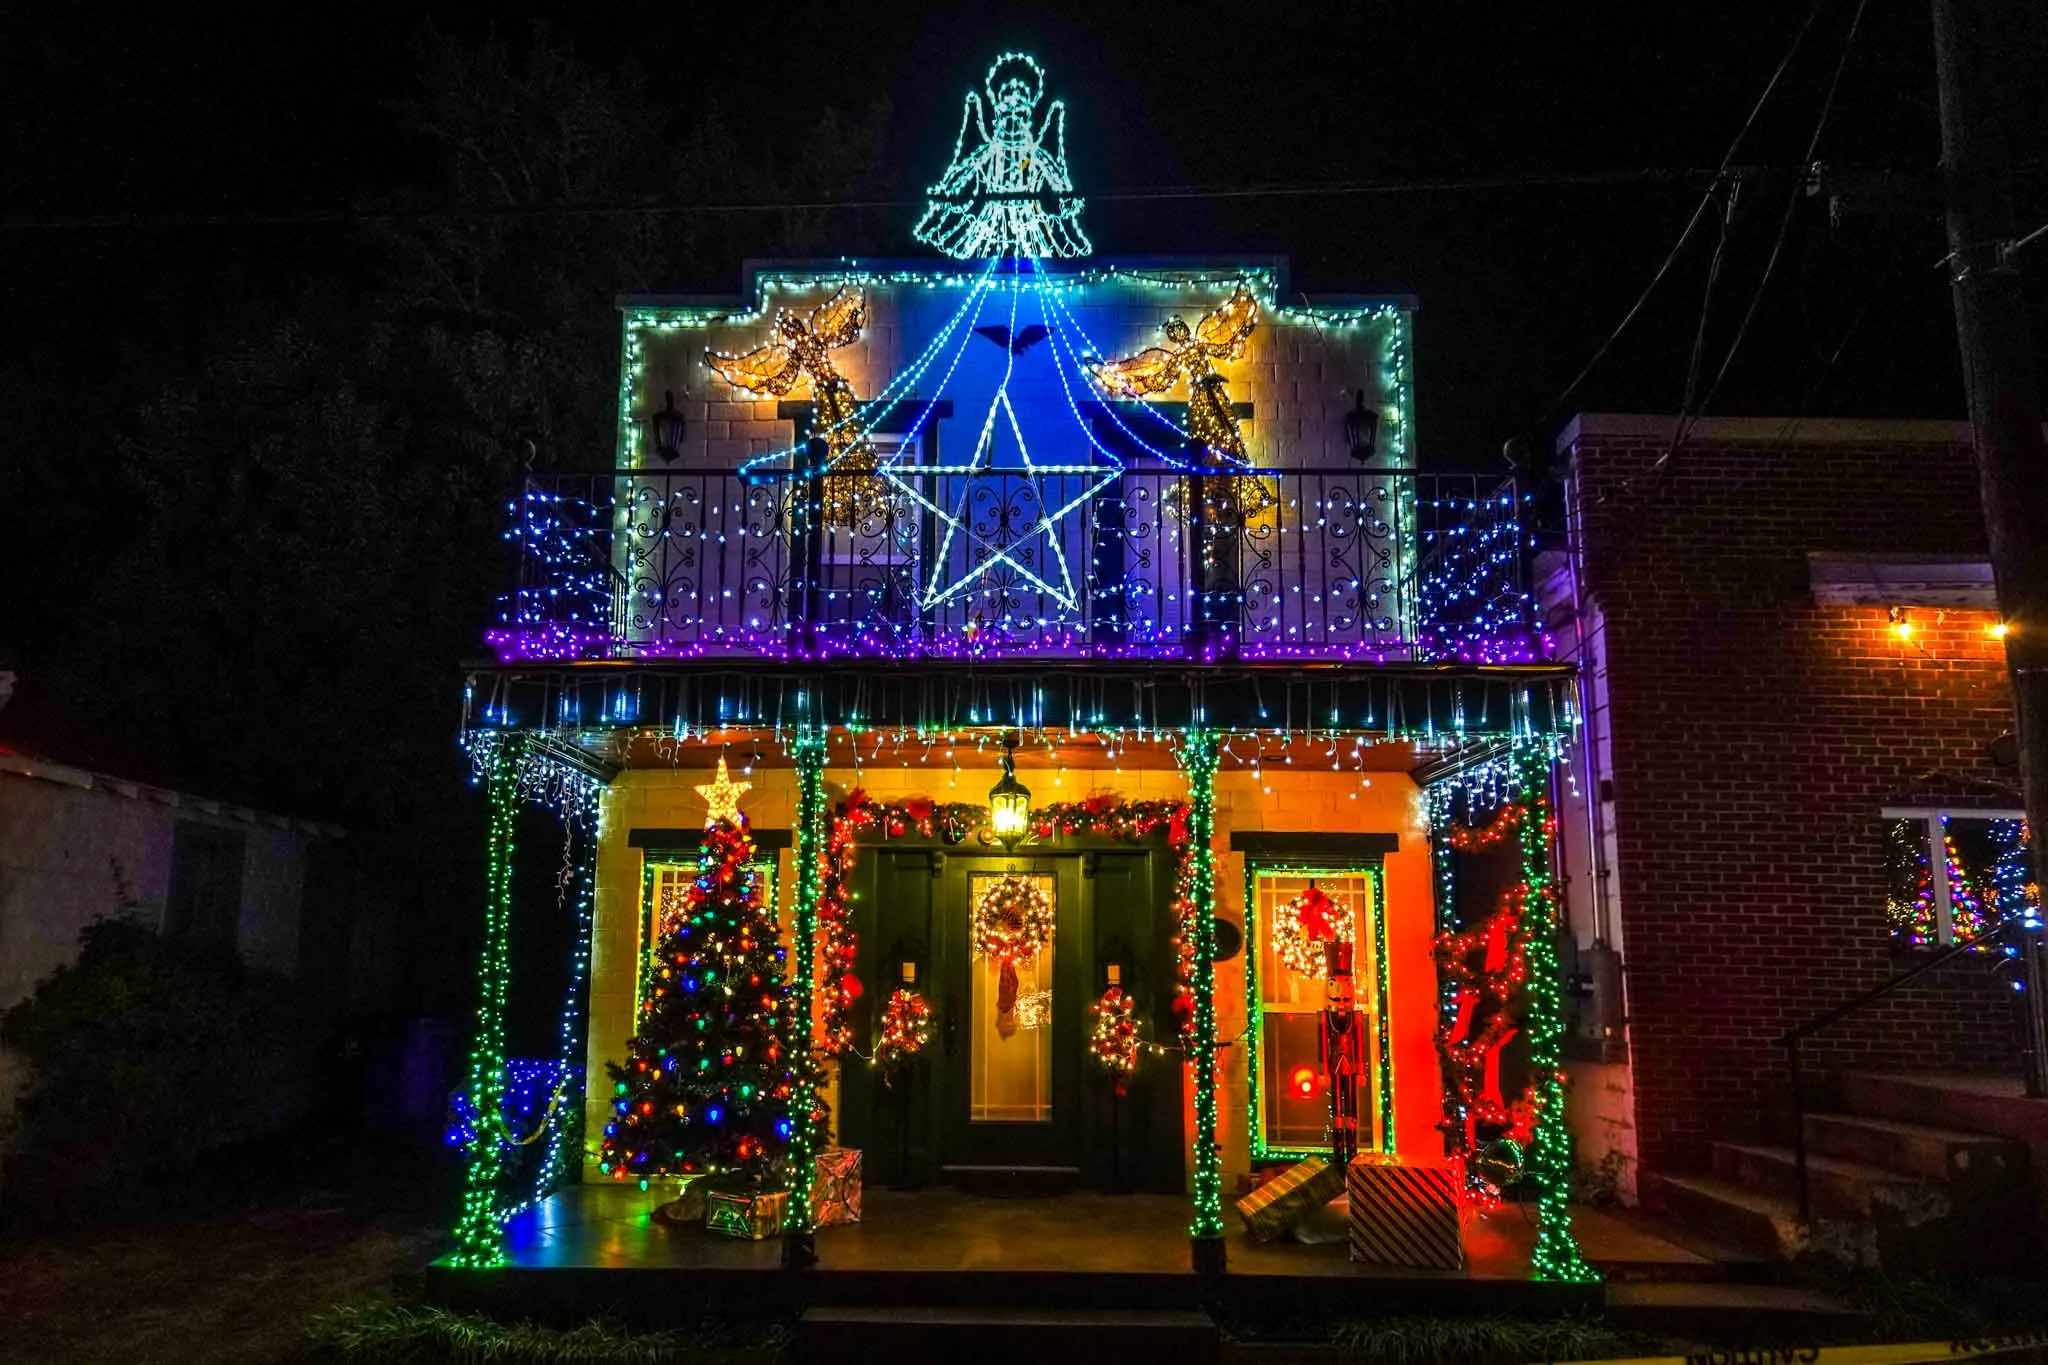 Building decorated with colorful Christmas lights and topped by an angel light sculpture